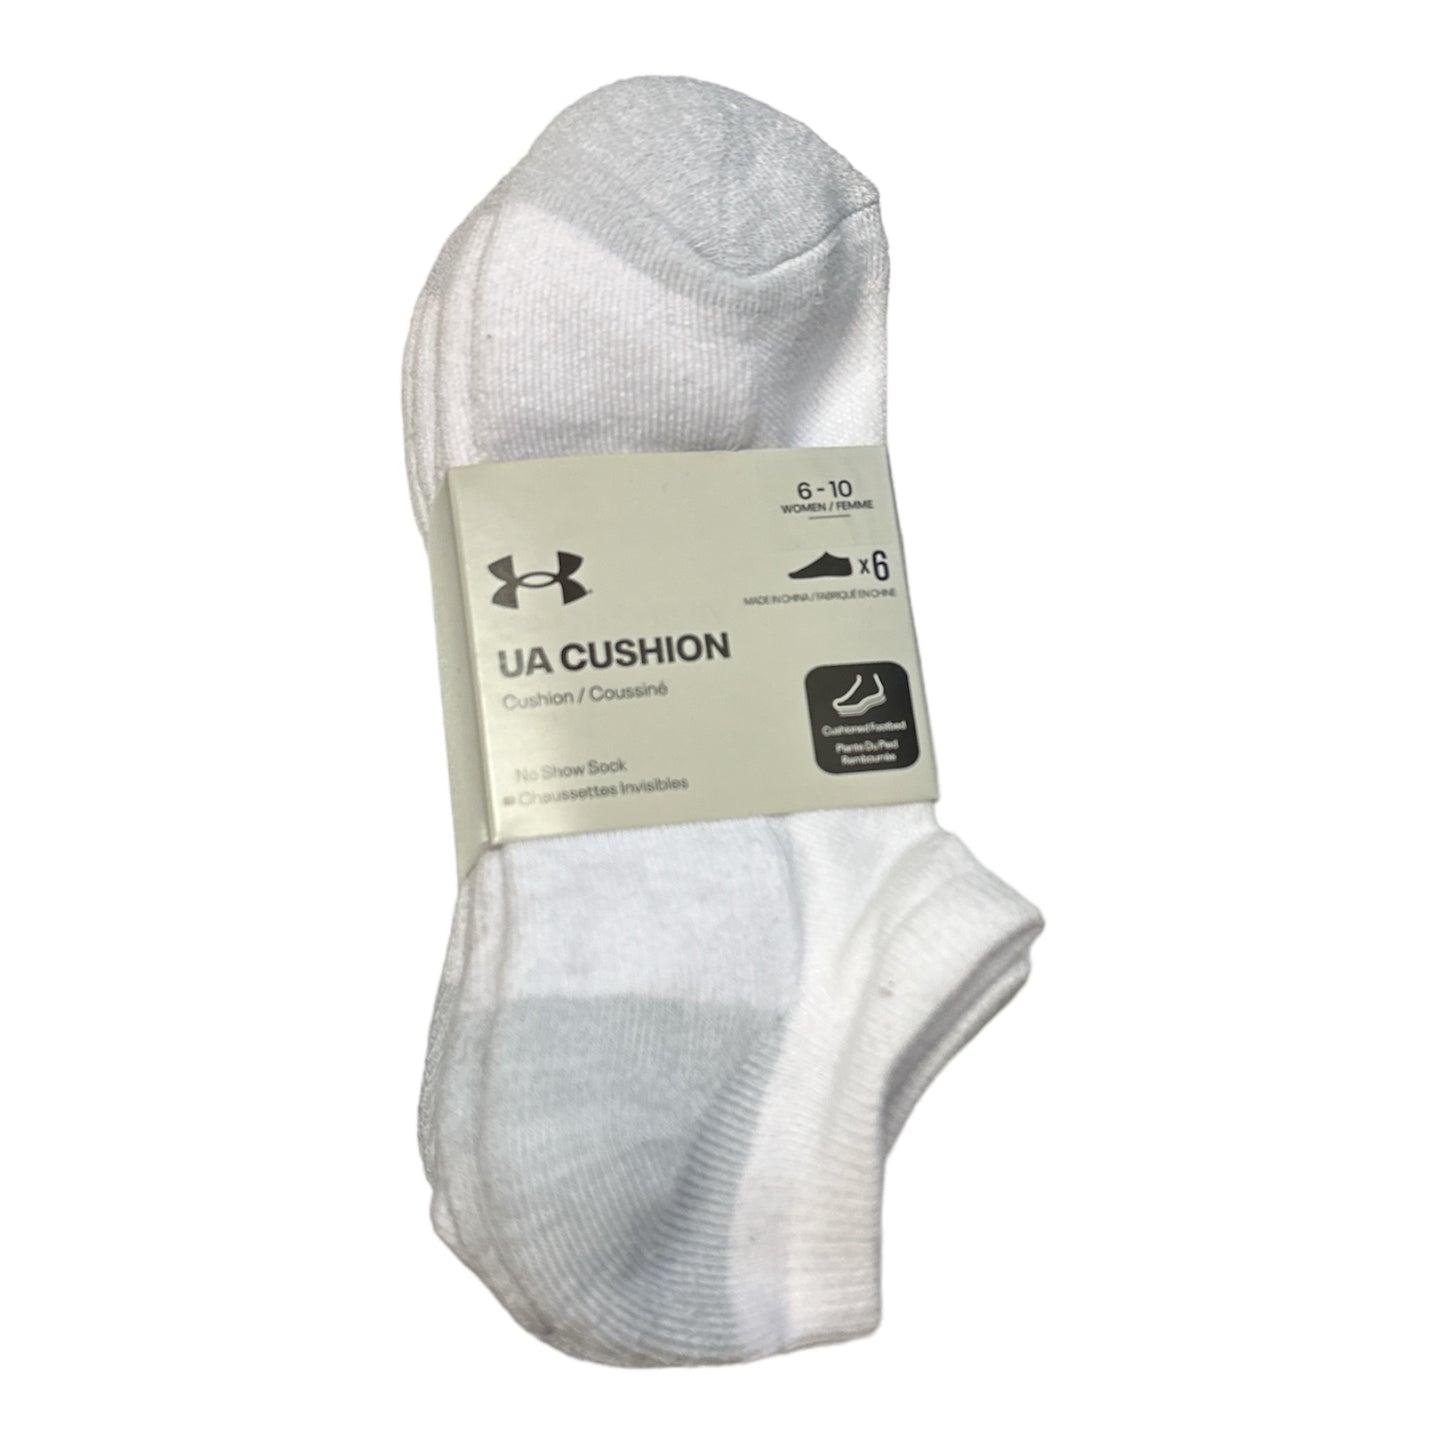 Under Armour Women's Cushioned Footbed Arch Support No Show Socks, Size 6-10